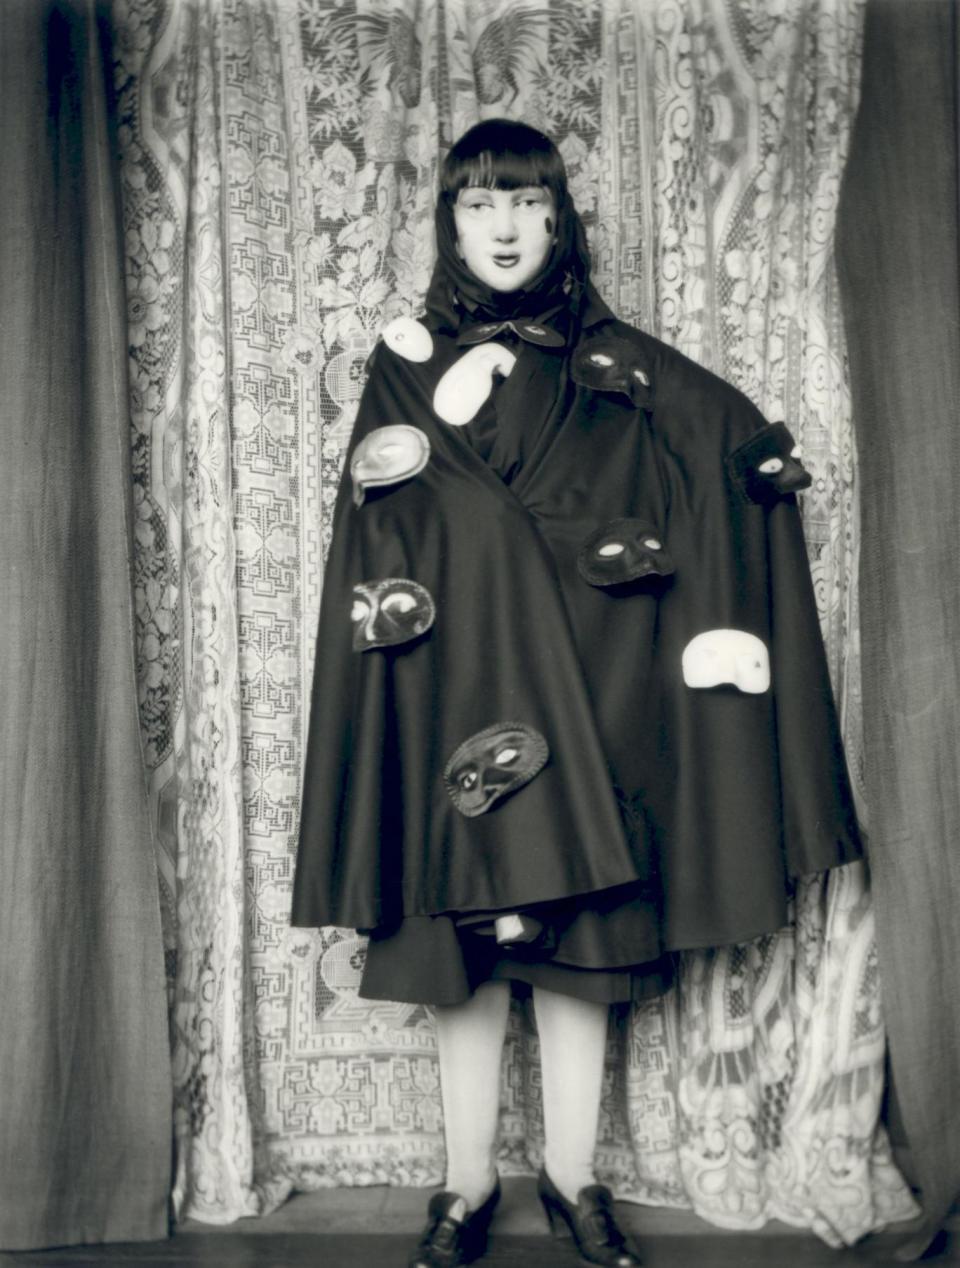 'Self-portrait (full length masked figure in cloak with masks)' by Claude Cahun, 1928 (© Jersey Heritage)